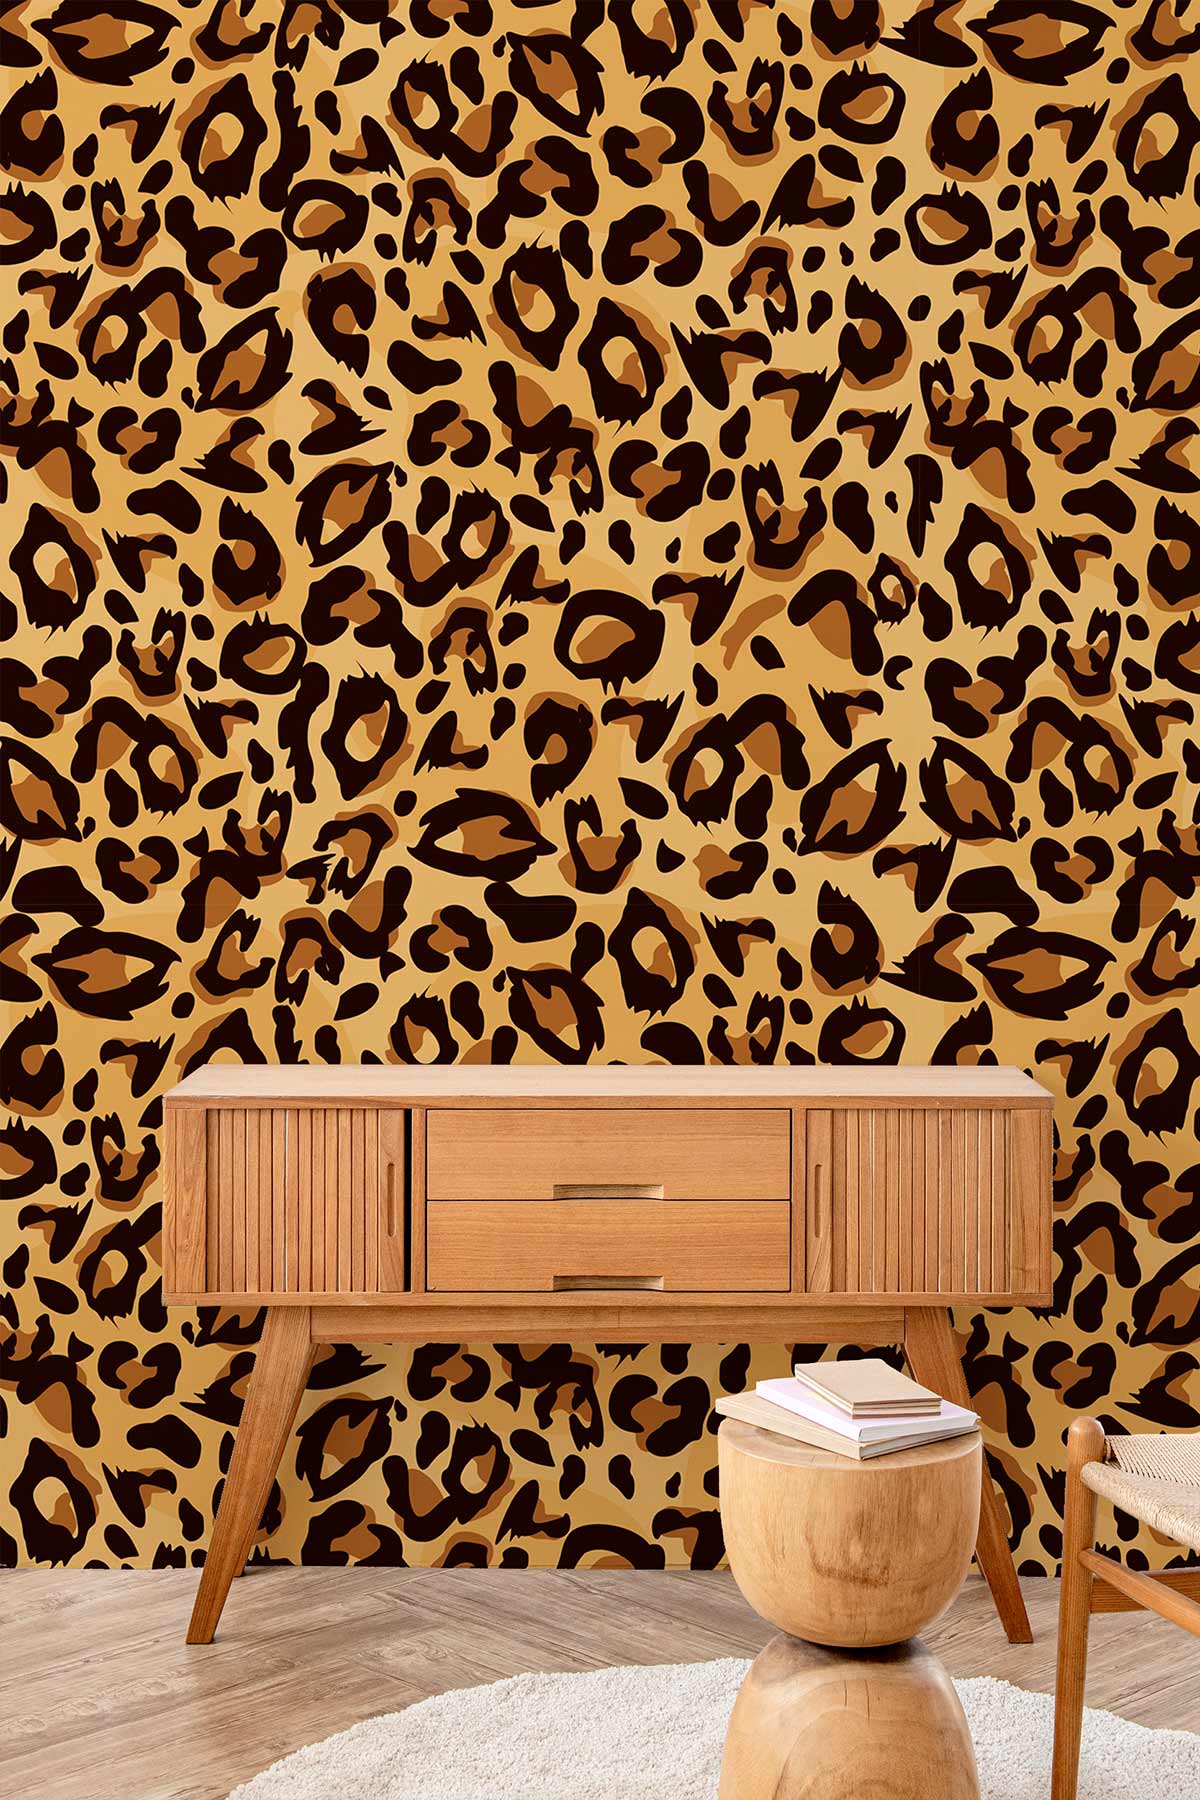 Lady Leopard Wallpaper in Authentic Brown and Black – Lust Home